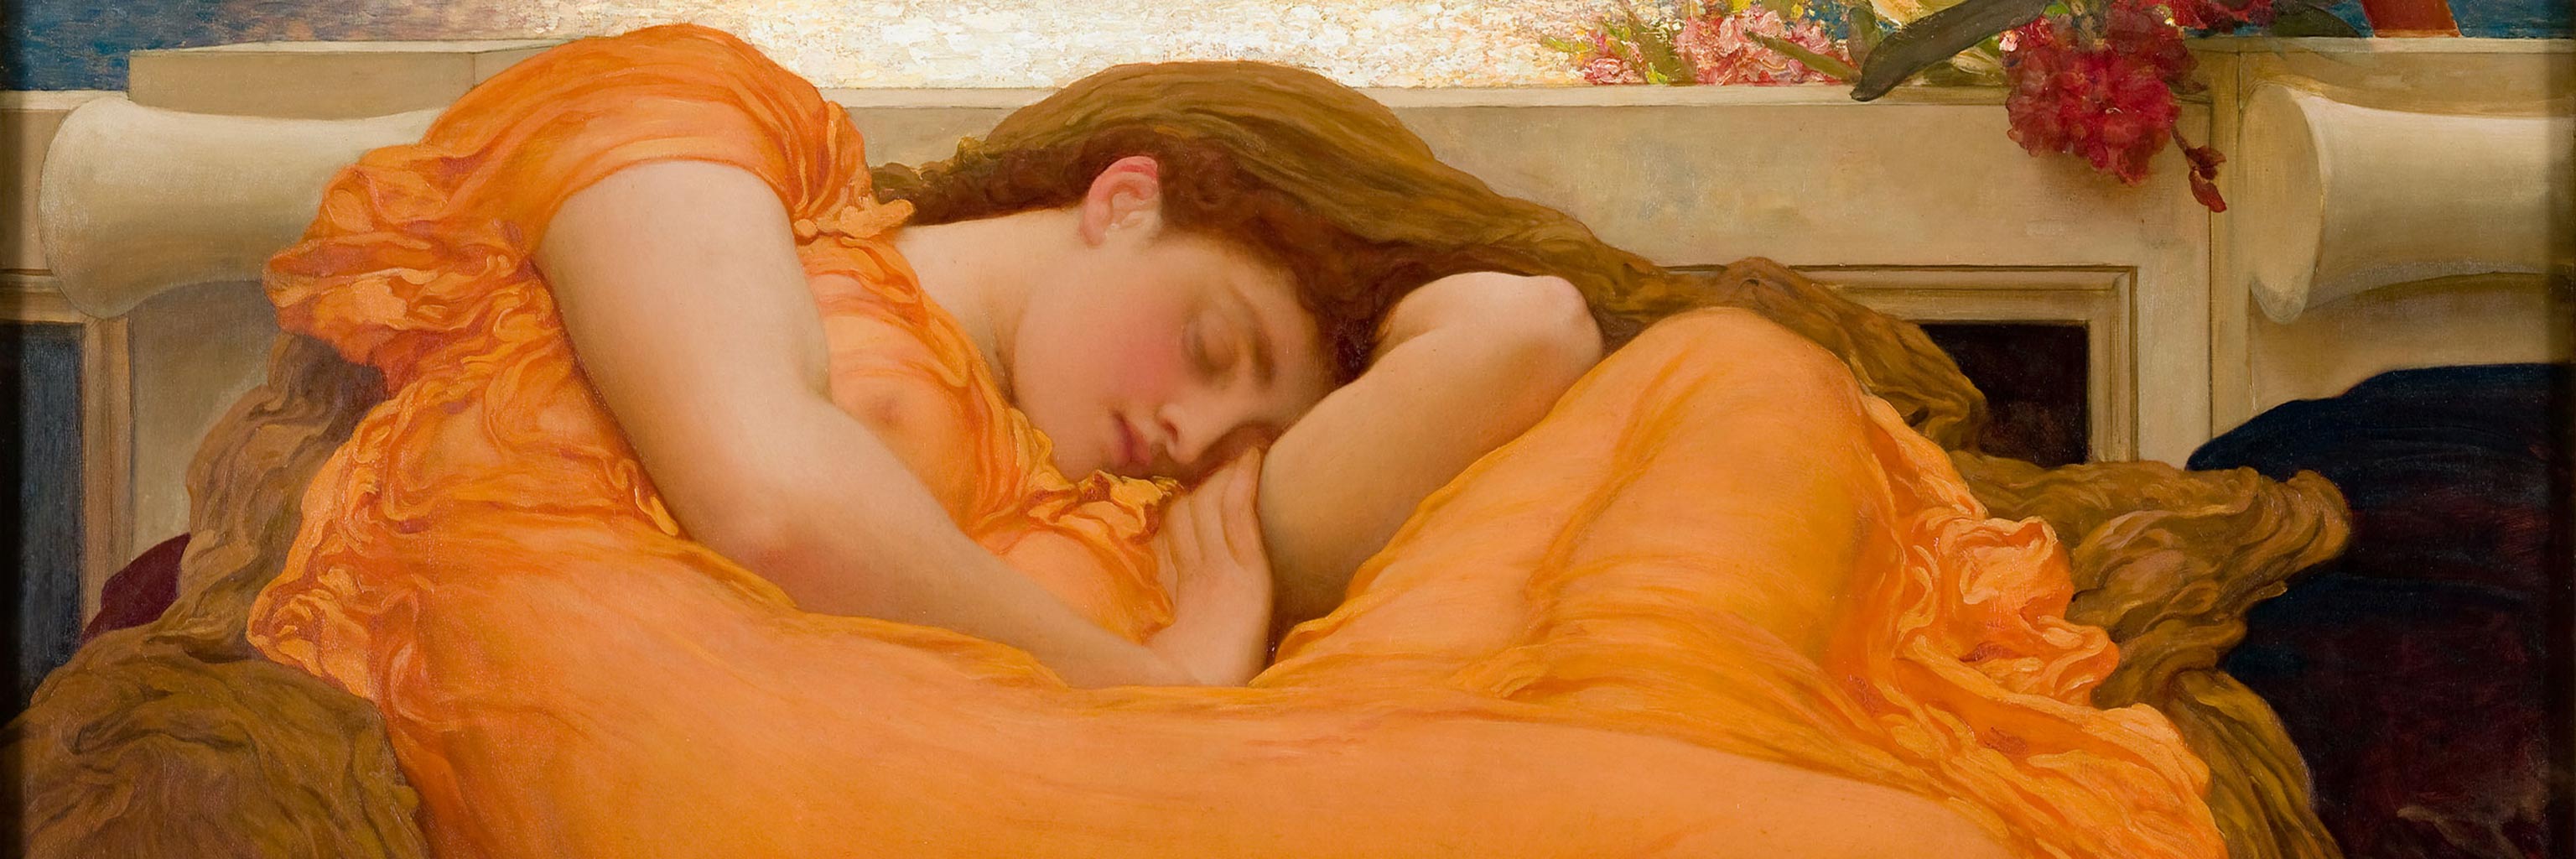 Flaming_June,_by_Frederic_Lord_Leighton_(1830-1896)